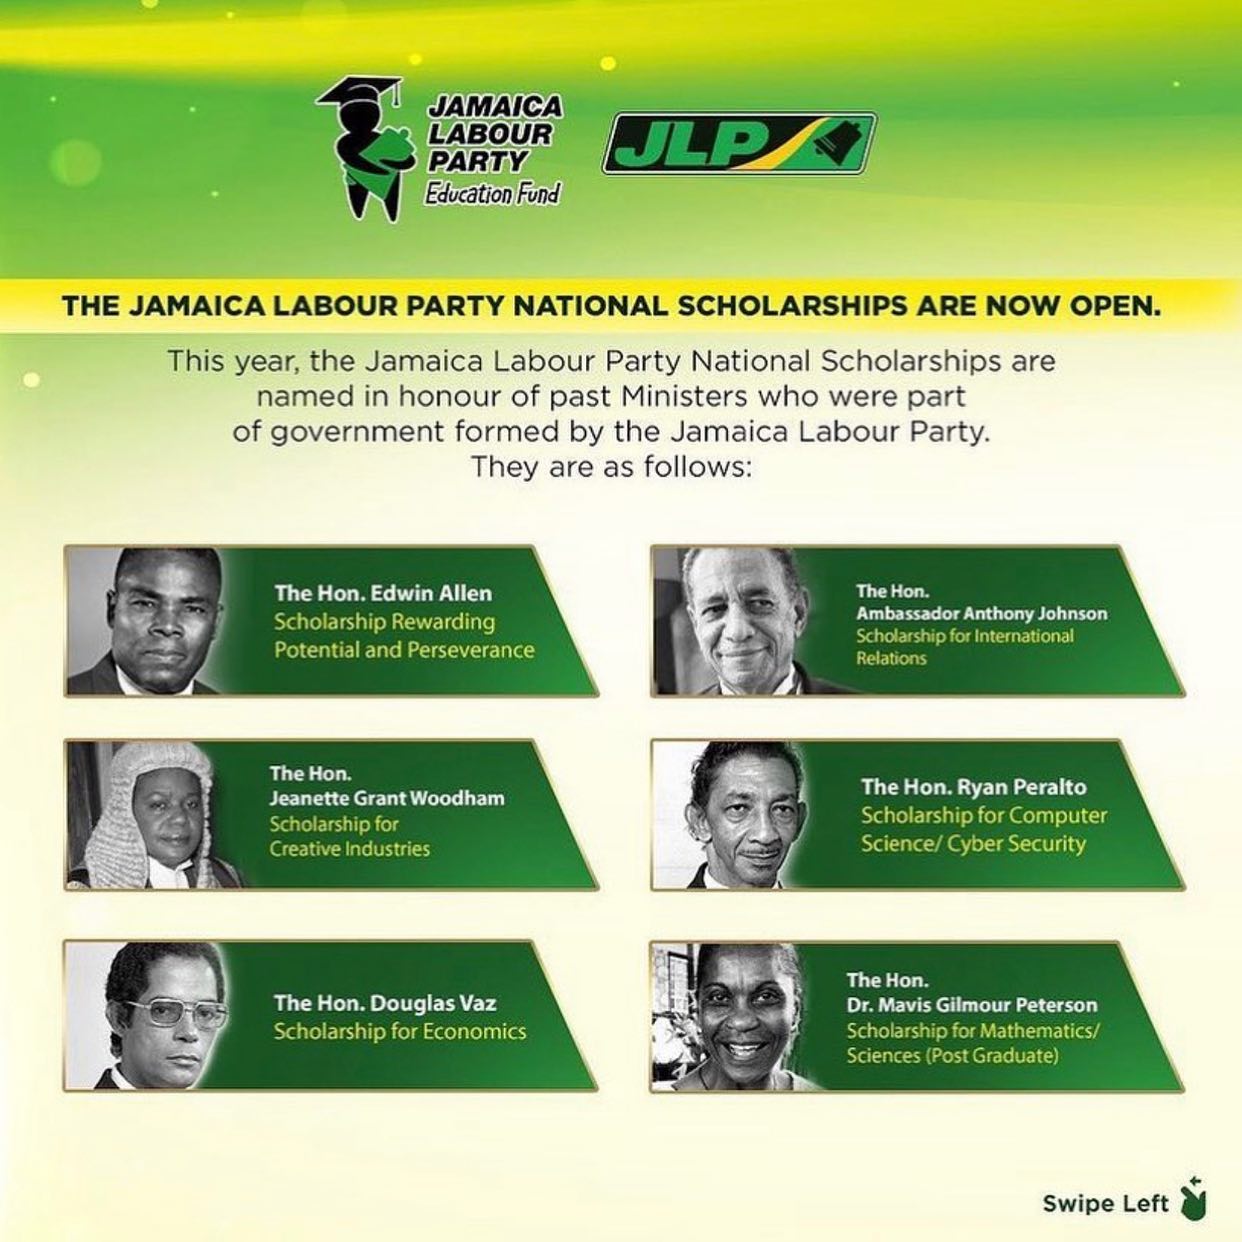 The 2021 Jamaica Labour Party Education Fund Scholarship Programme. 4 tertiary merit-based scholarships valued between J$500k -$700k annually for 3 years. Specialization in Journalism, Epidemiology/Public Health, Mathematics/Economics, or Teacher Education. Deadline is August 19, 2021.